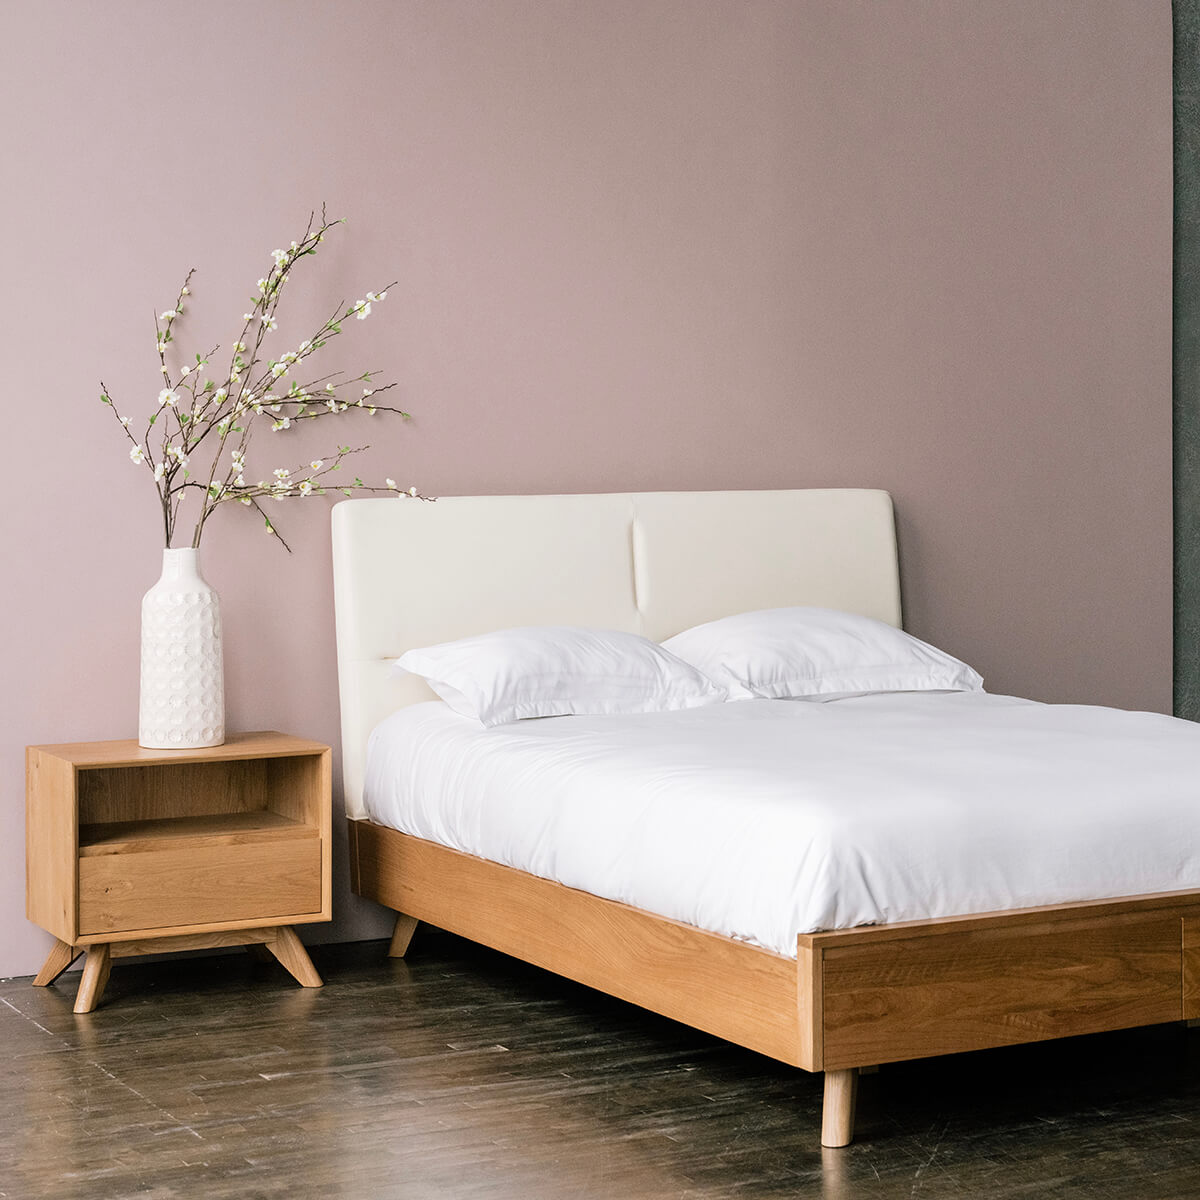 Mim Concept best Modern furniture stores in Toronto, Ottawa and Mississauga to sell modern contemporary bedroom furniture and condo furniture. Italian leather headboard bed Low profile platform storage bed solid oak wood modern organic  Edit alt text